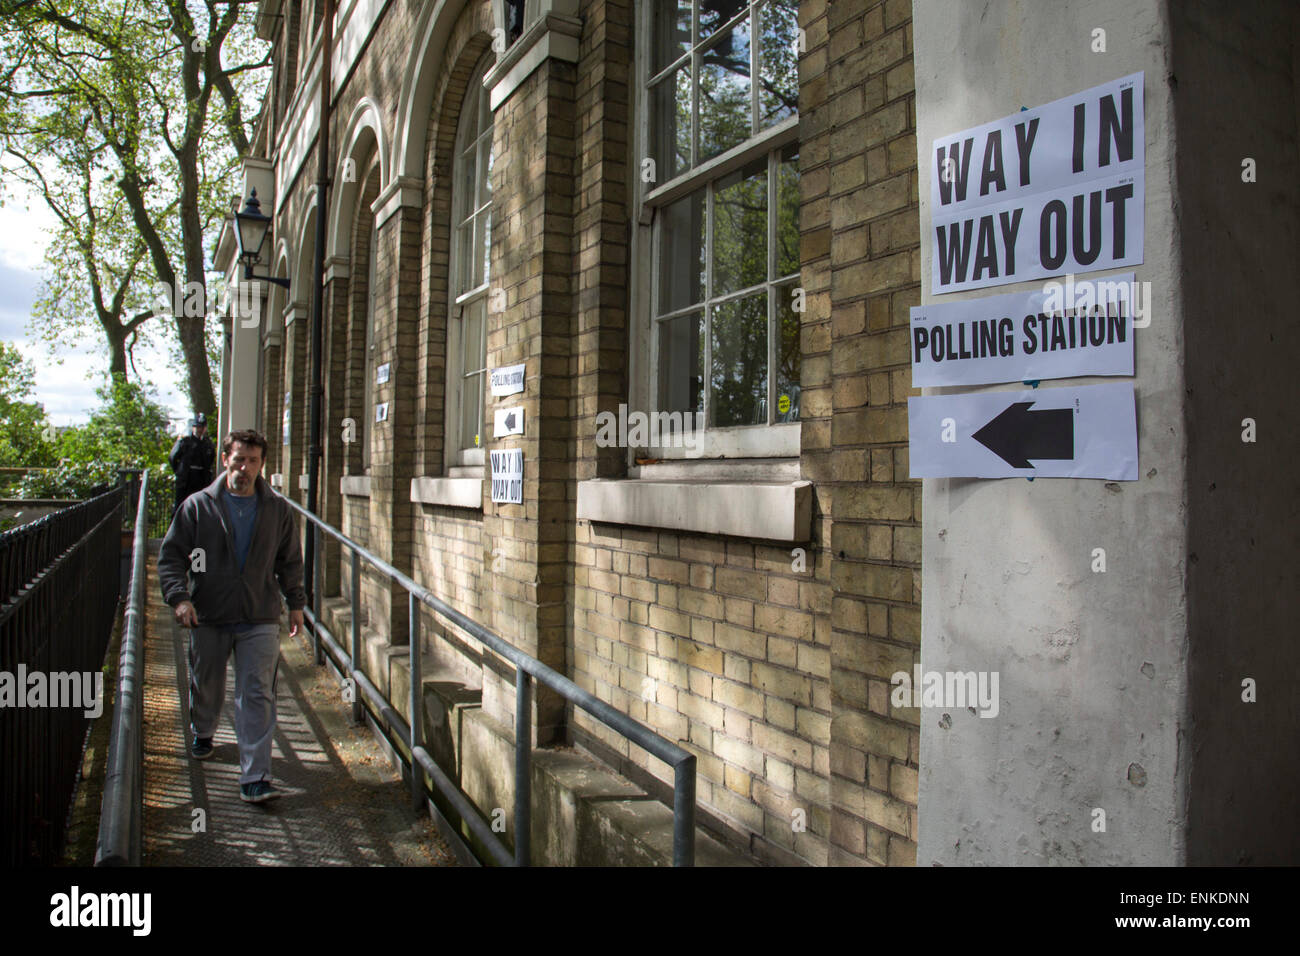 London, UK. Thursday 7th May 2015. Voters attending a polling station at St Pauls Institute in the constituency of  Poplar and Limehouse in East London on the day of the general election. This is a Labour Party seat, although this electin is set to be one of the most hotly contested in a generation. Stock Photo